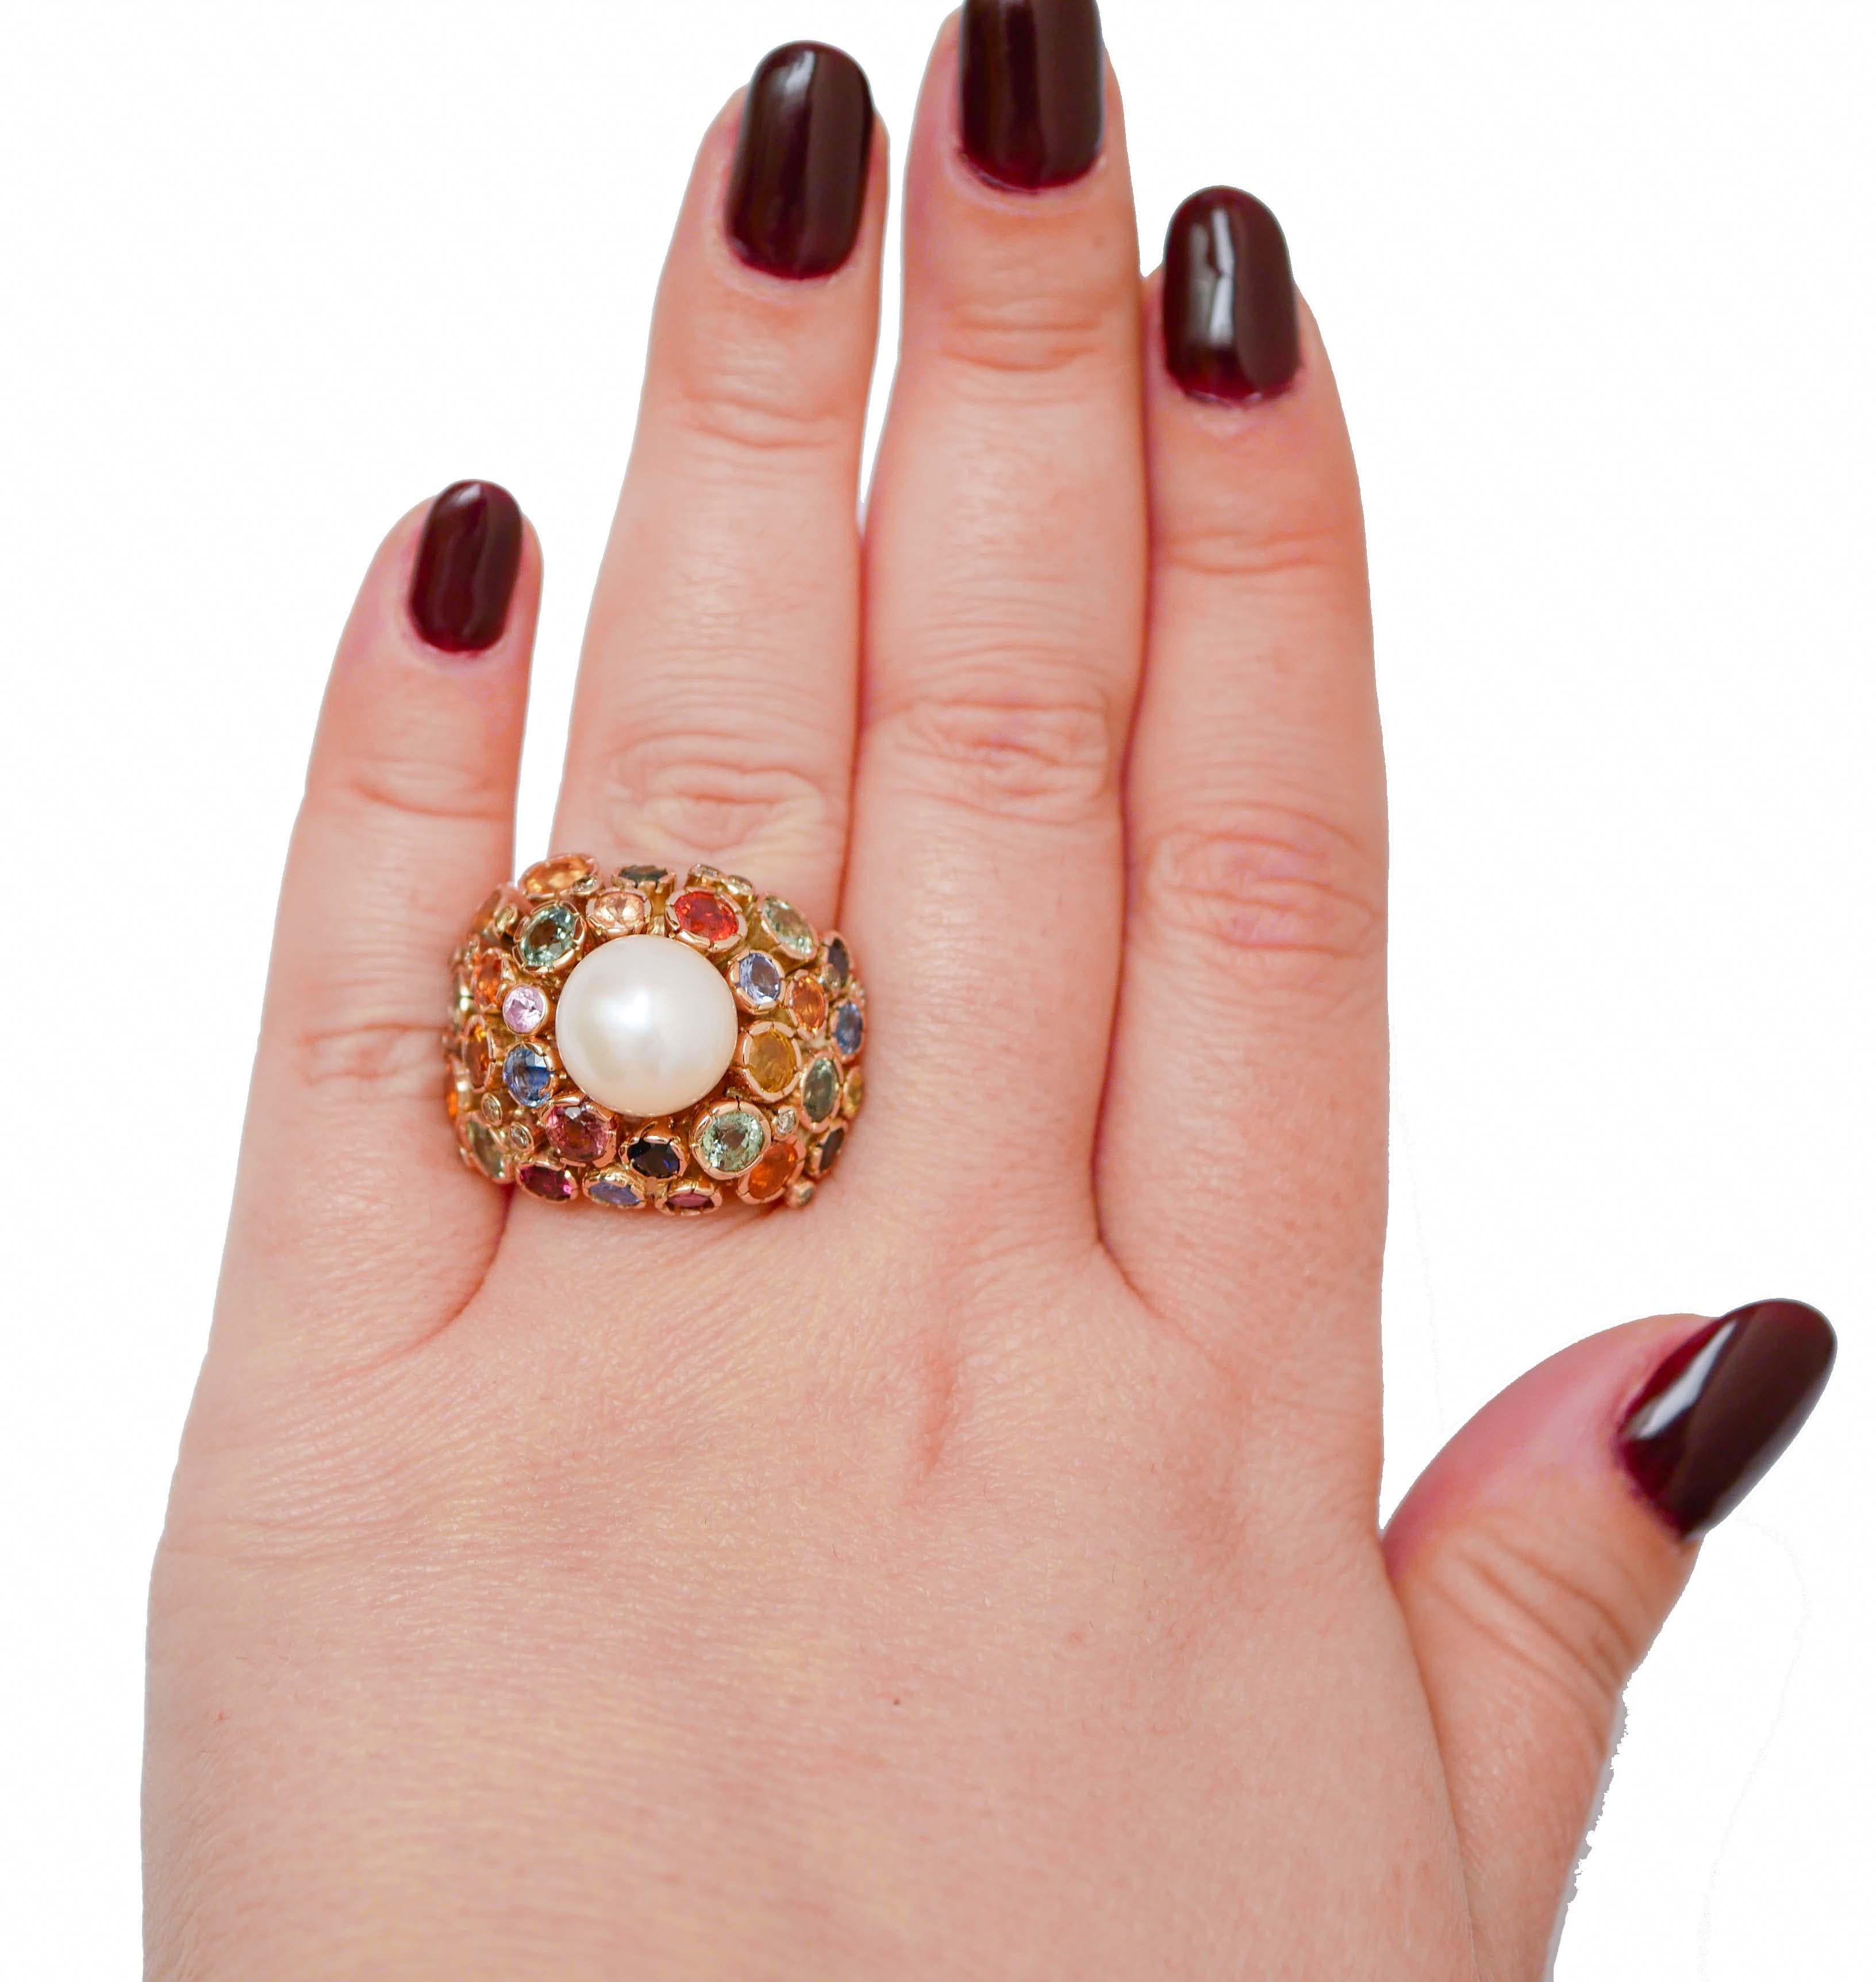 Mixed Cut White Pearl, Multicolor Sapphires, Diamonds, 14 Karat Rose Gold Cluster Ring. For Sale